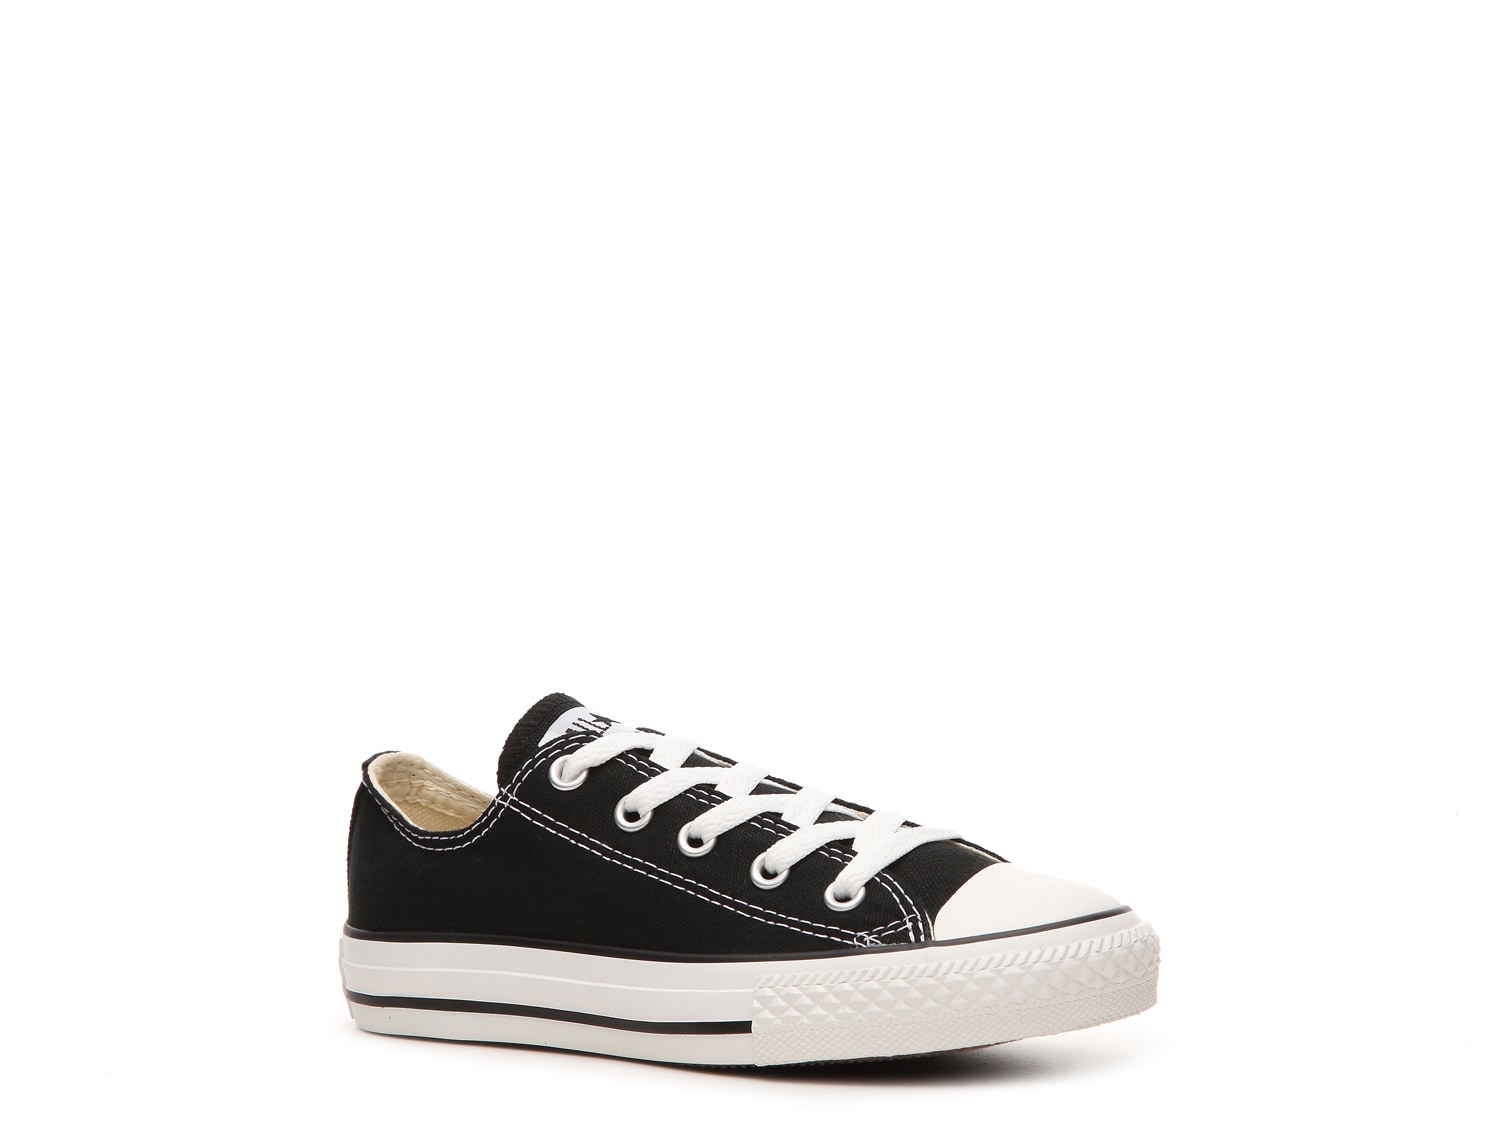 Converse Chuck Taylor All Star and 